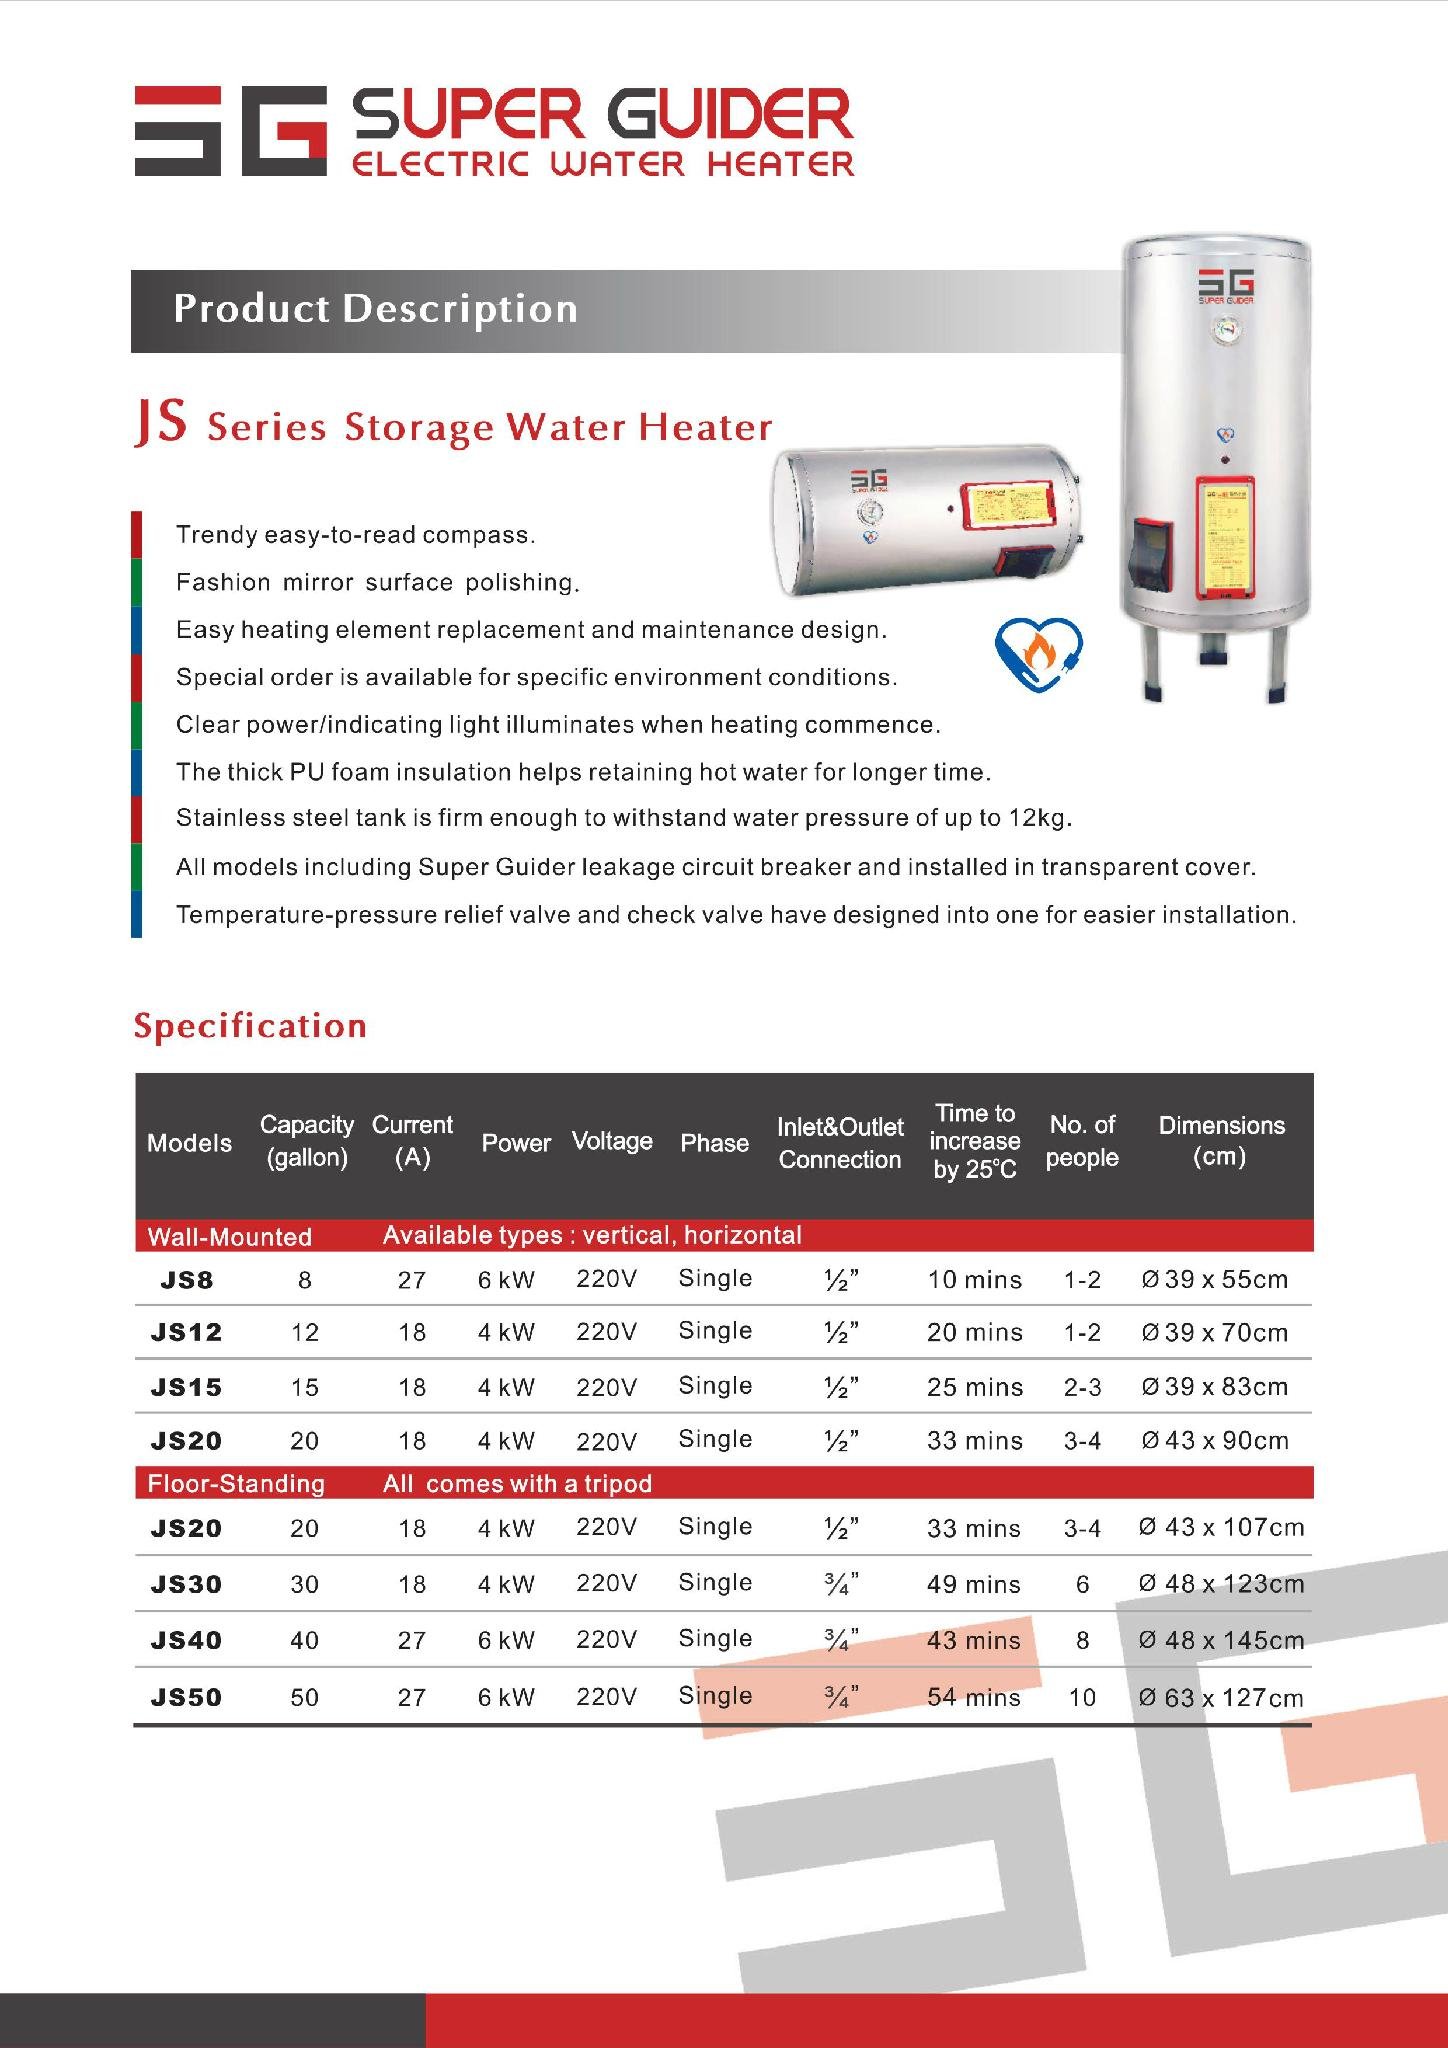 Super Guider Electric Water Heater Horizontal-Wall Series JS15-BW 2